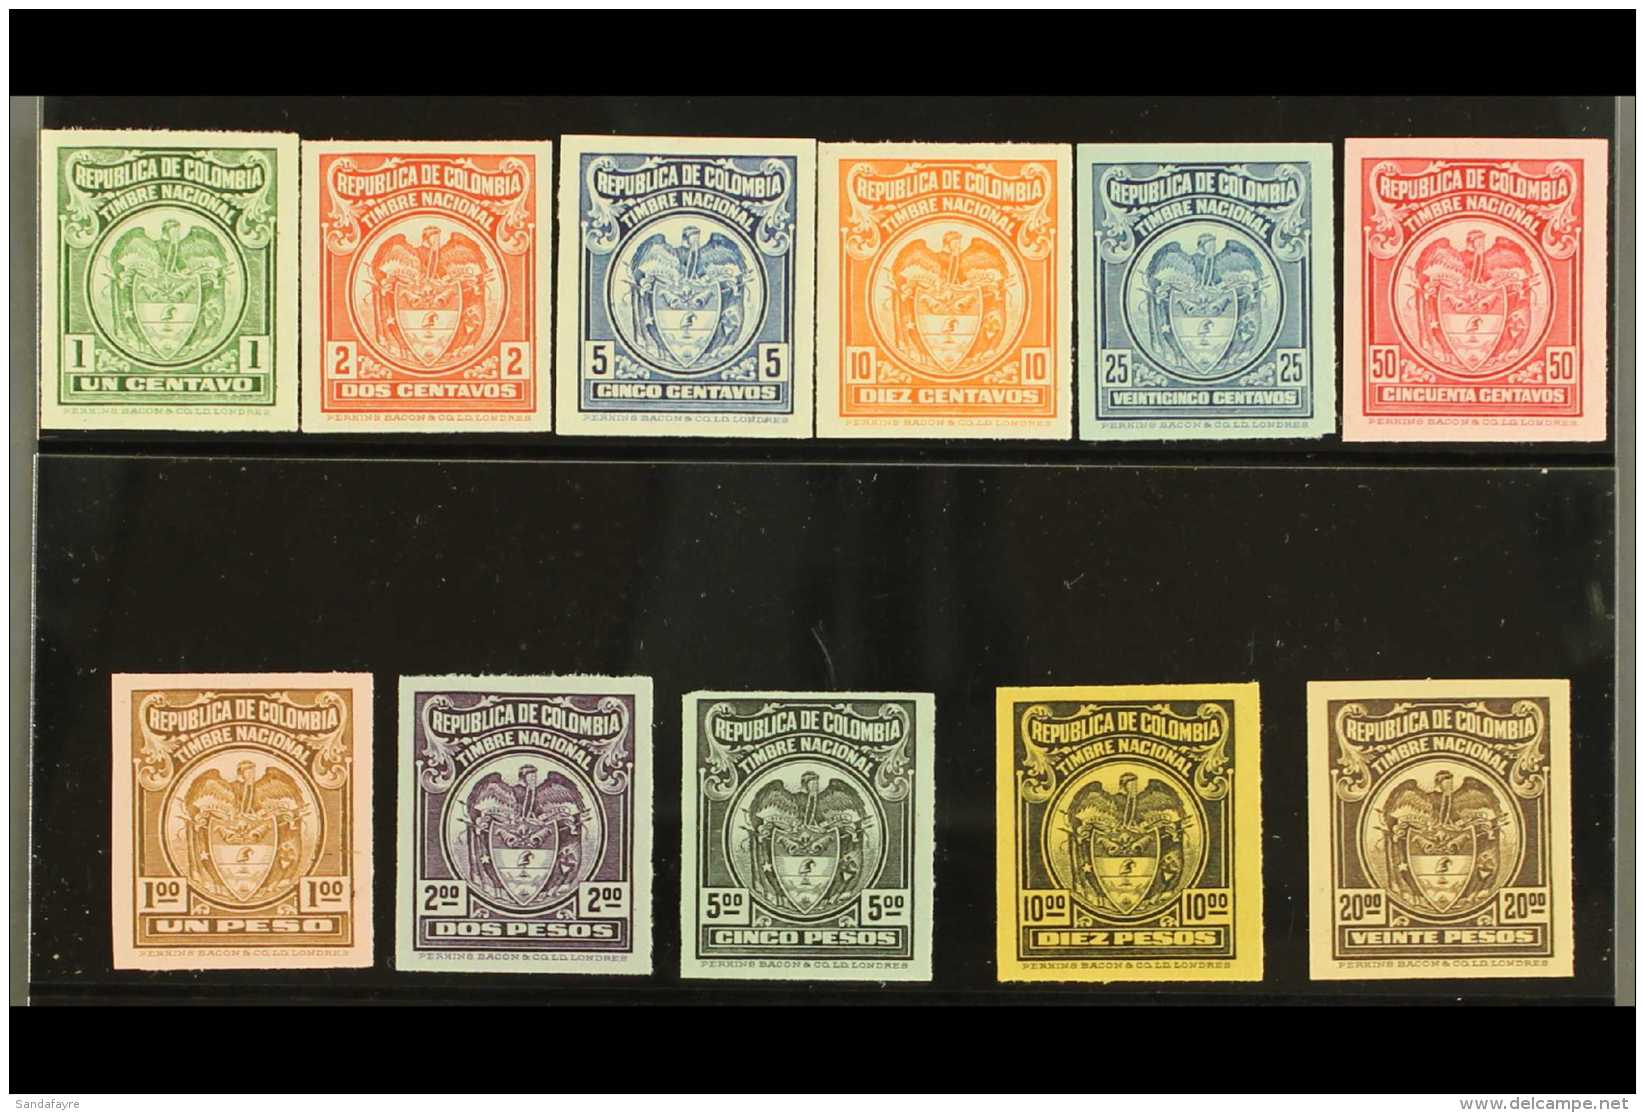 REVENUE STAMPS - PROOFS Perkins Bacon &amp; Co. "Timbre Nacional" Set (1c To 20p) - IMPERF PROOFS On Thin Paper,... - Colombia